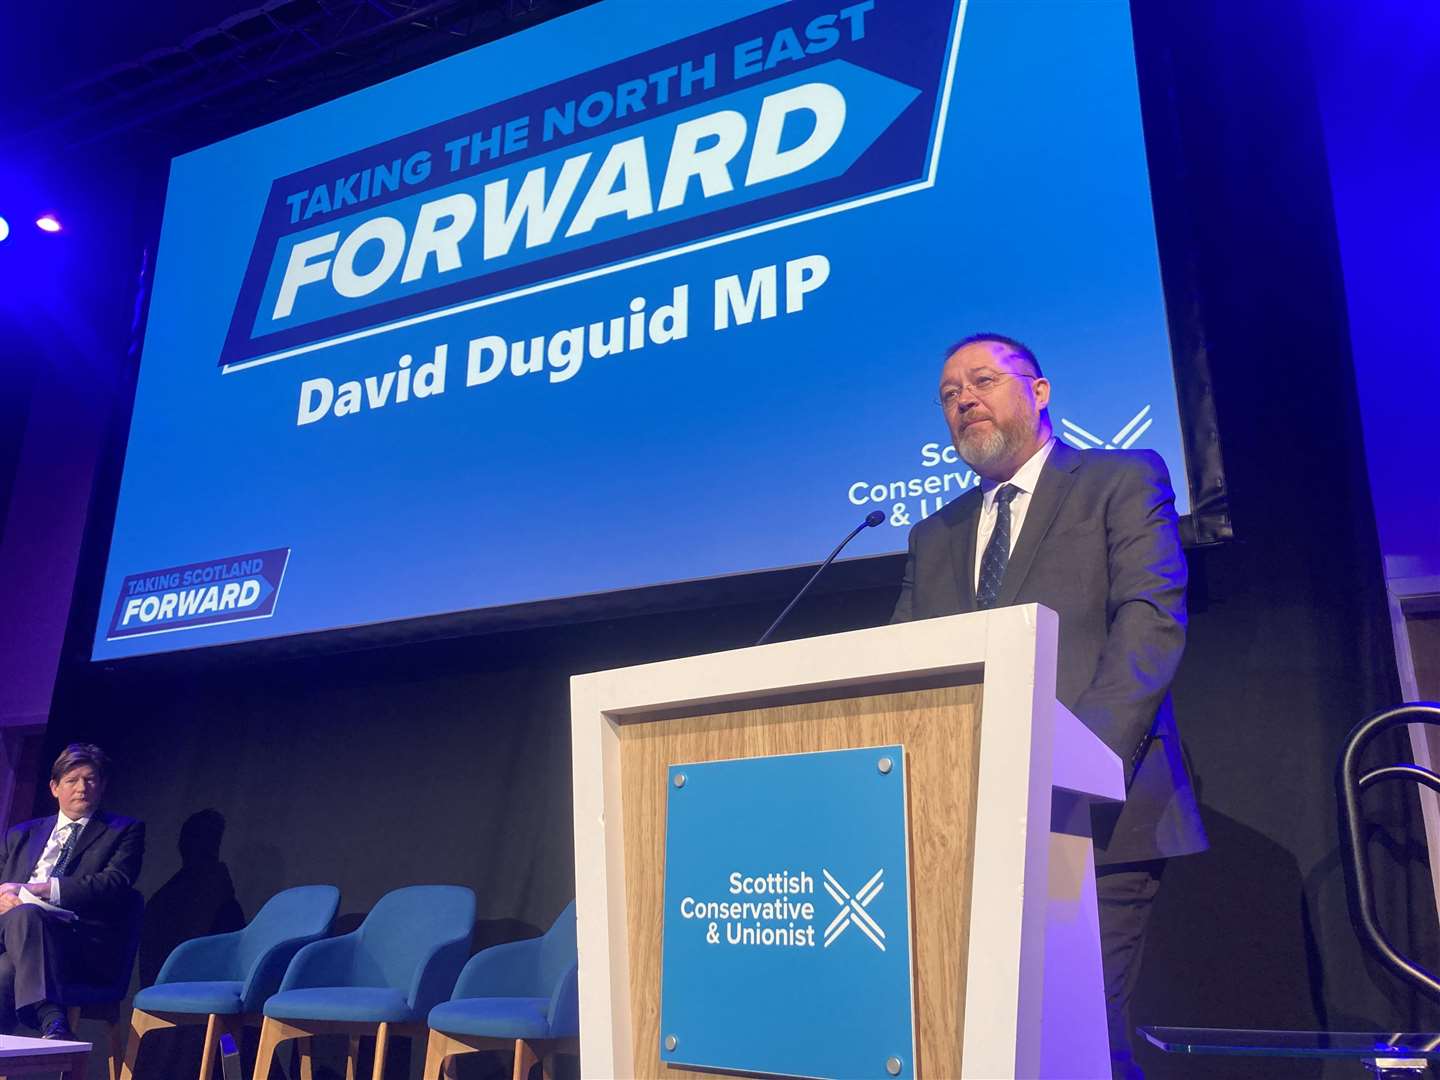 MP David Duguid addressed the conference in Aberdeen.